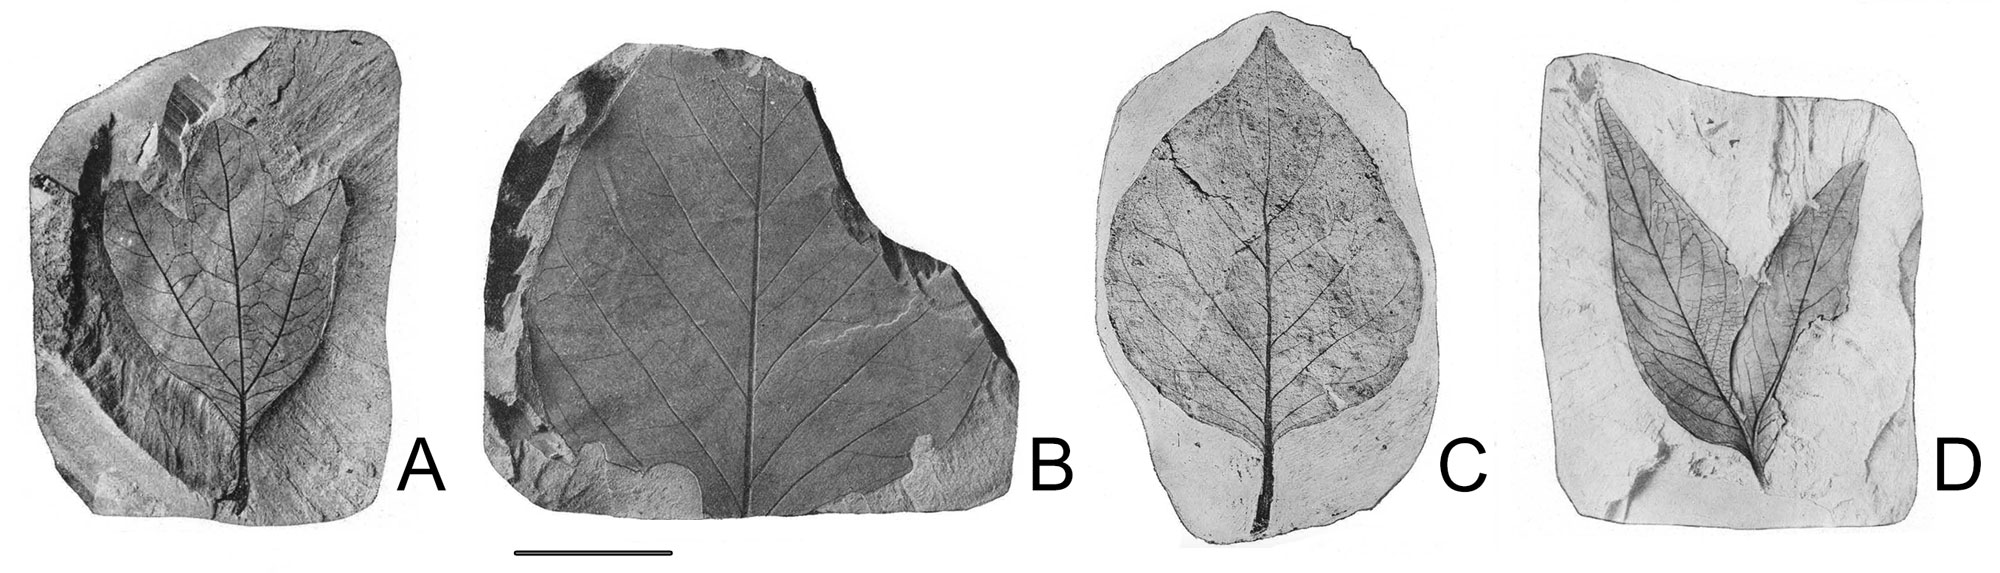 Grayscale photos of four Cretaceous leaf fossils from a 1919 monograph by E.W. Berry.